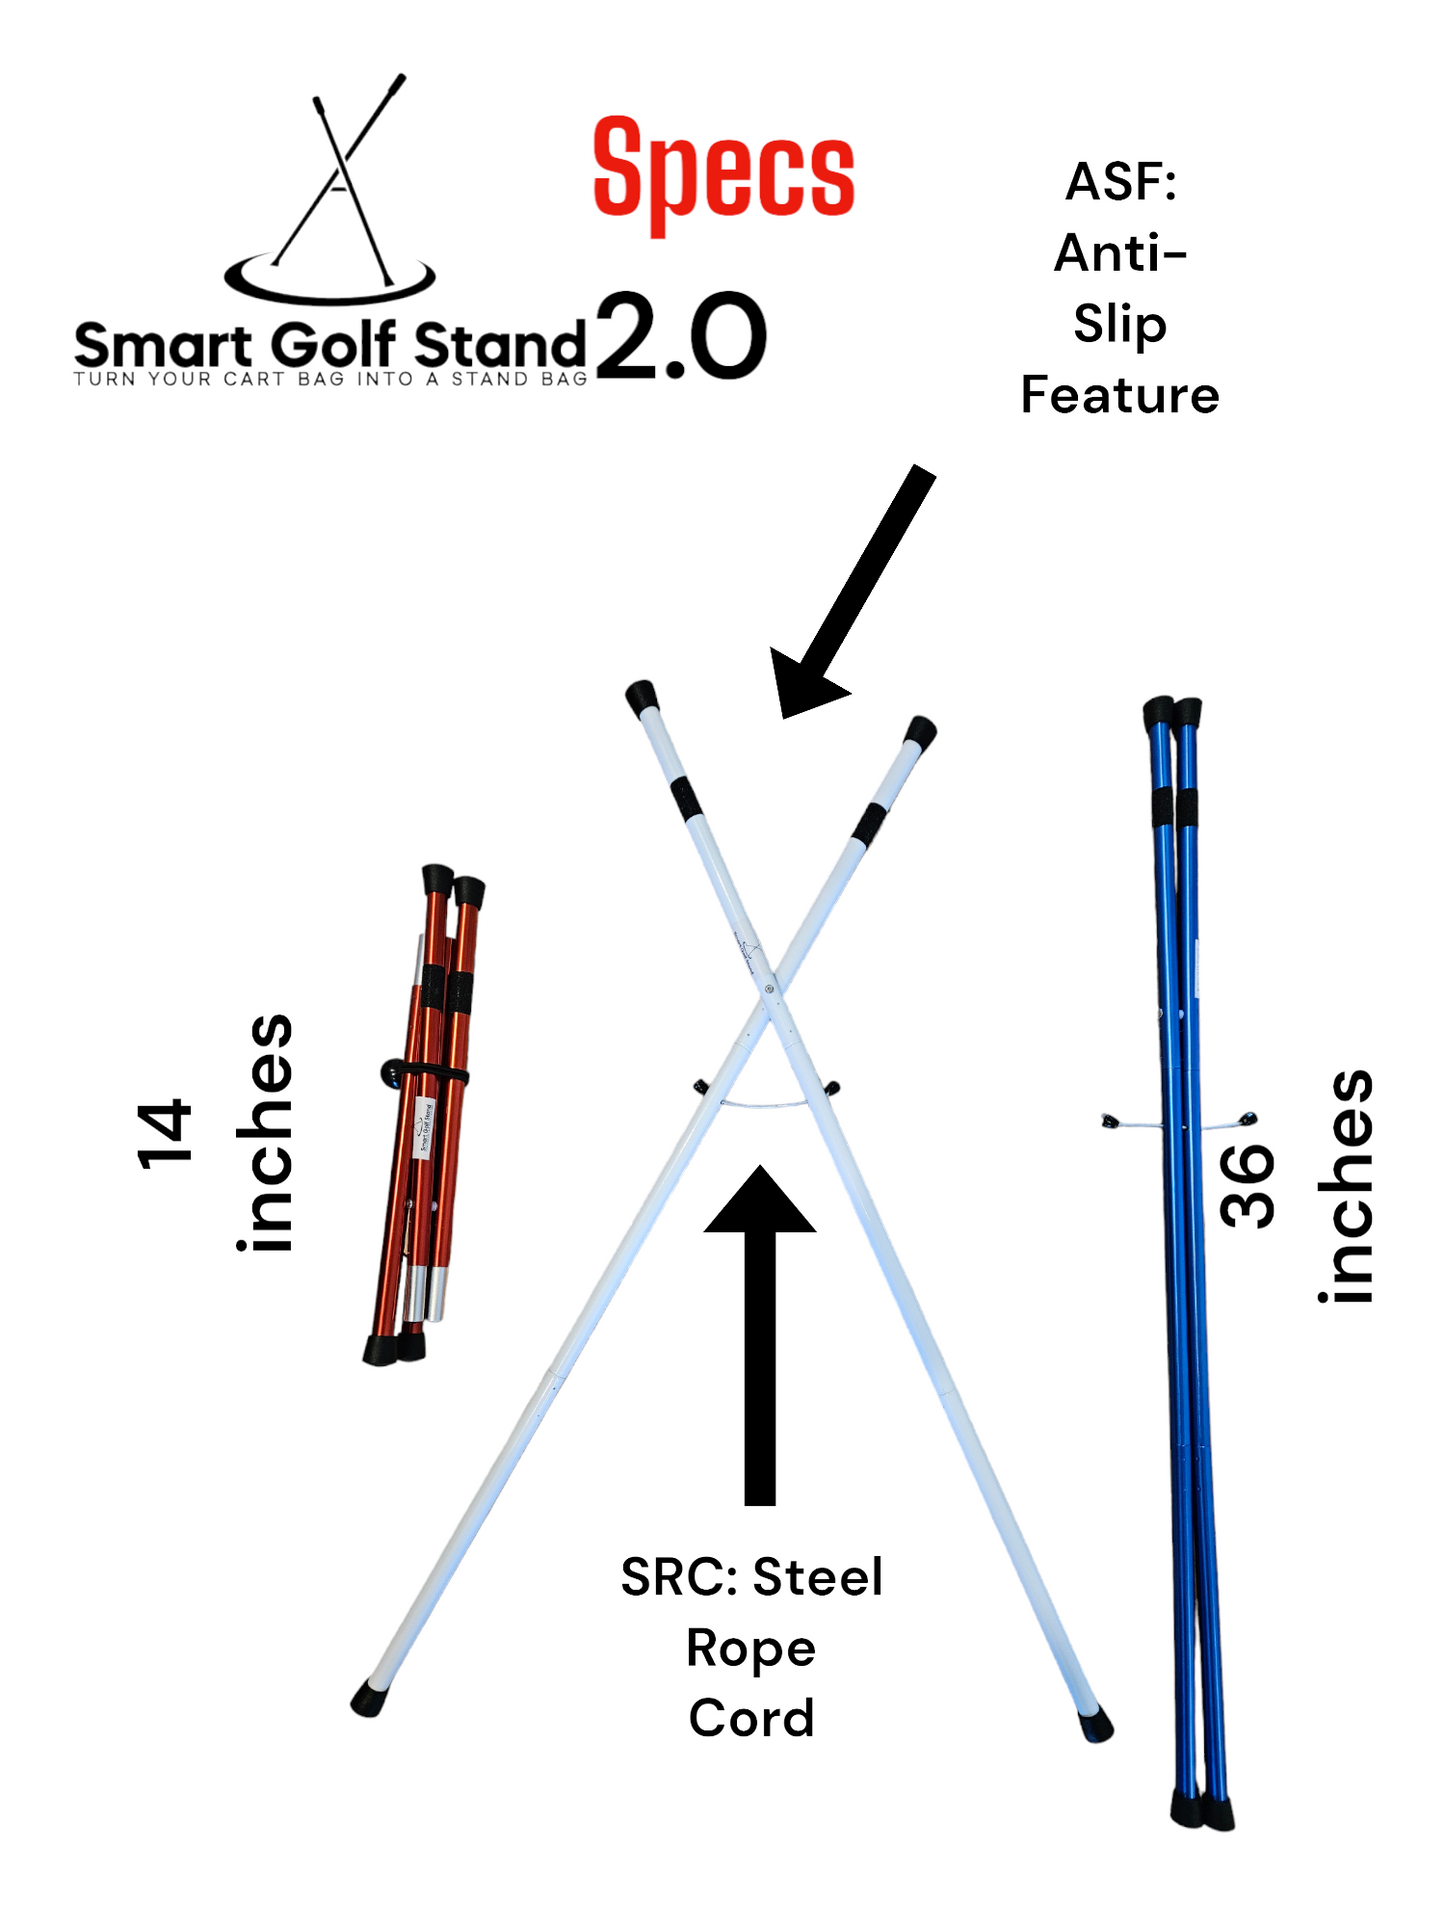 Smart Golf Stand 2.0: Turn your Cart bag into a Stand Bag!